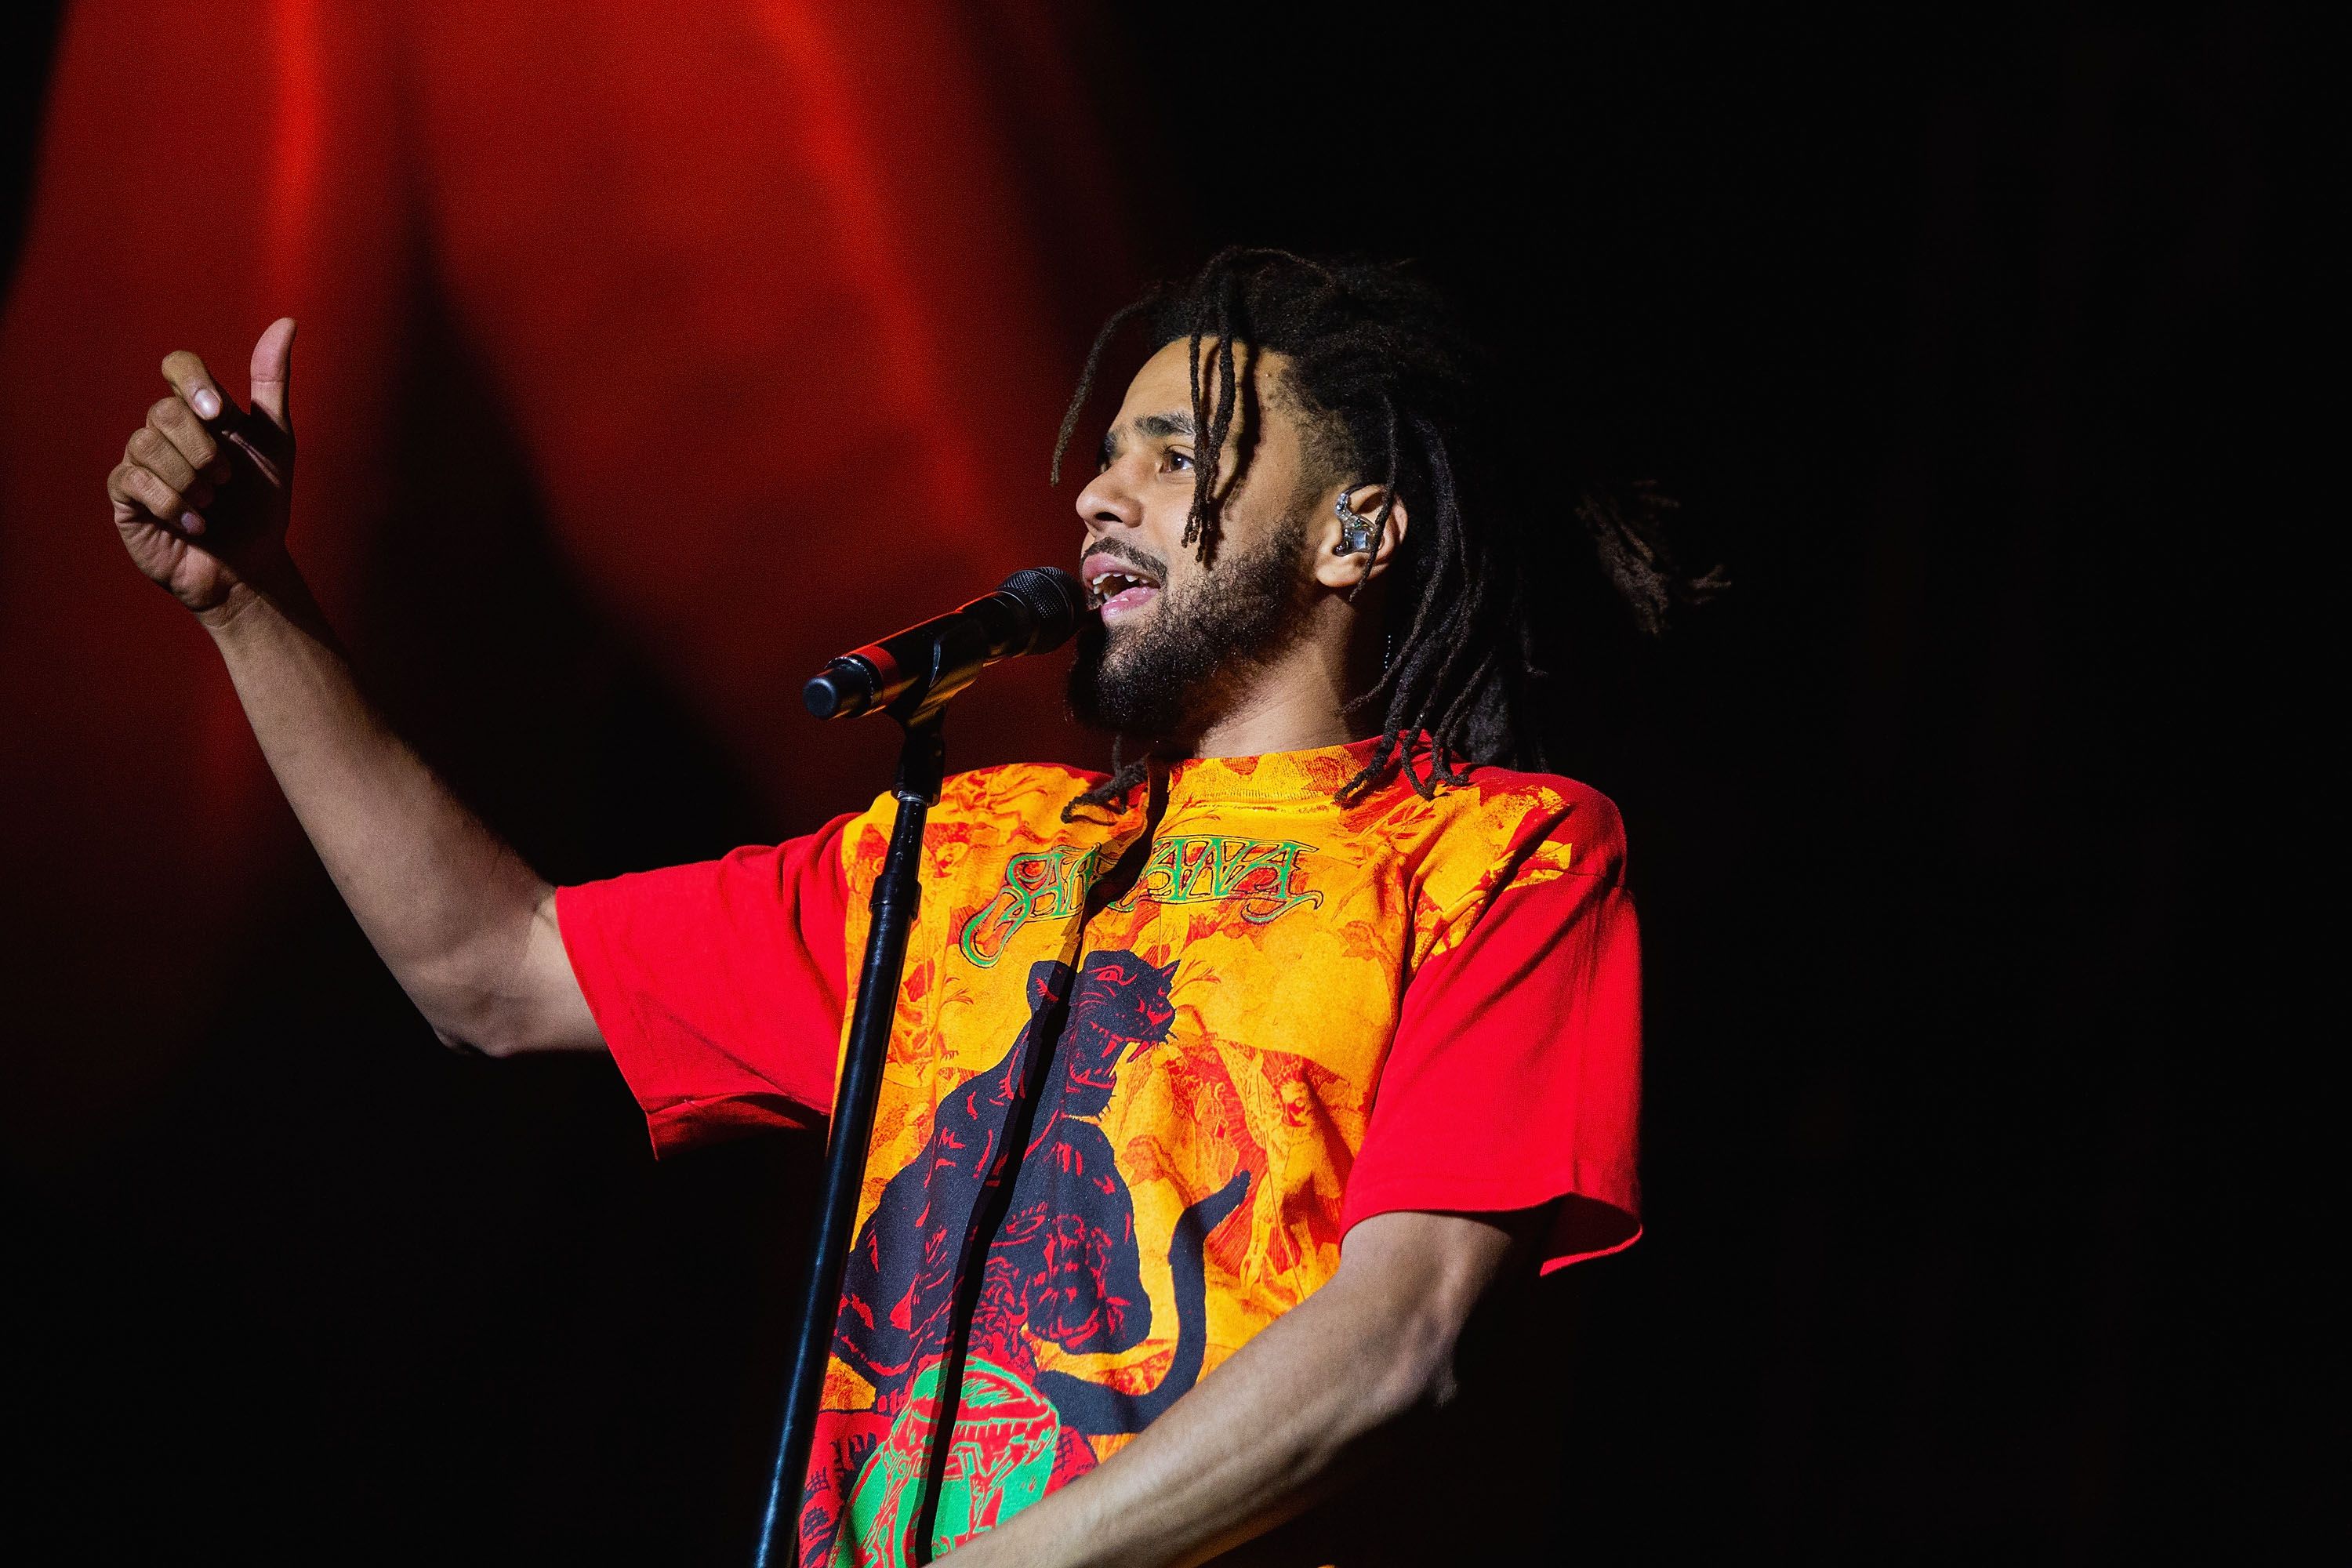 J. Cole at the Bumbershoot at Seattle Center on September 1, 2018, in Seattle, Washington. | Source: Getty Images